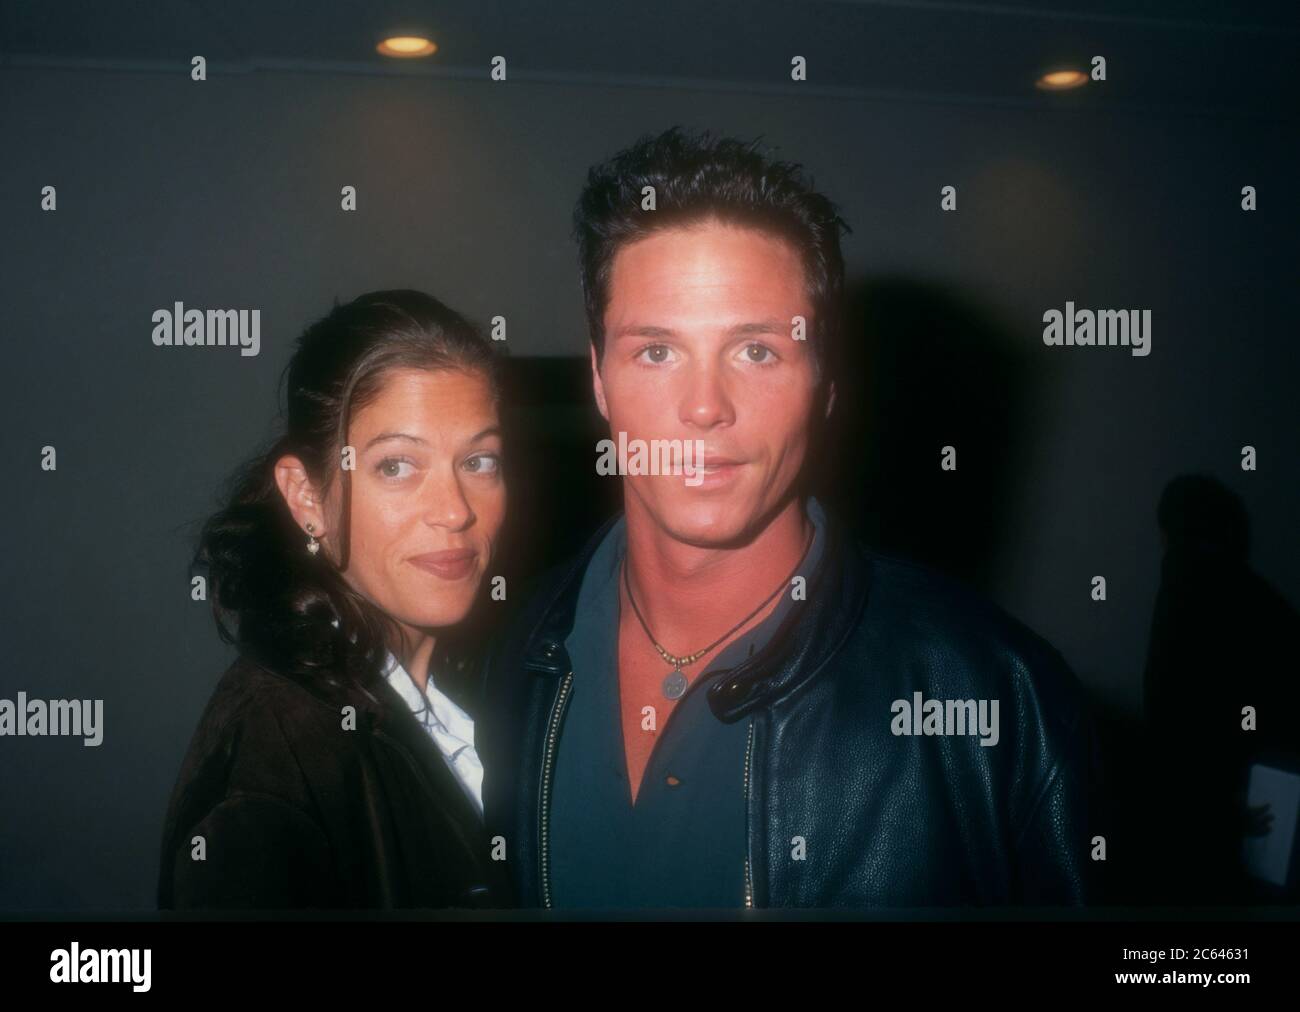 Westwood, California, USA 13th December 1995 Actor Jason Wiles and wife Joanne Roberts attend Universal Pictures' '12 Monkeys' Premiere on December 13, 1995 at Mann Bruin Theatre in Westwood, California, USA. Photo by Barry King/Alamy Stock Photo Stock Photo